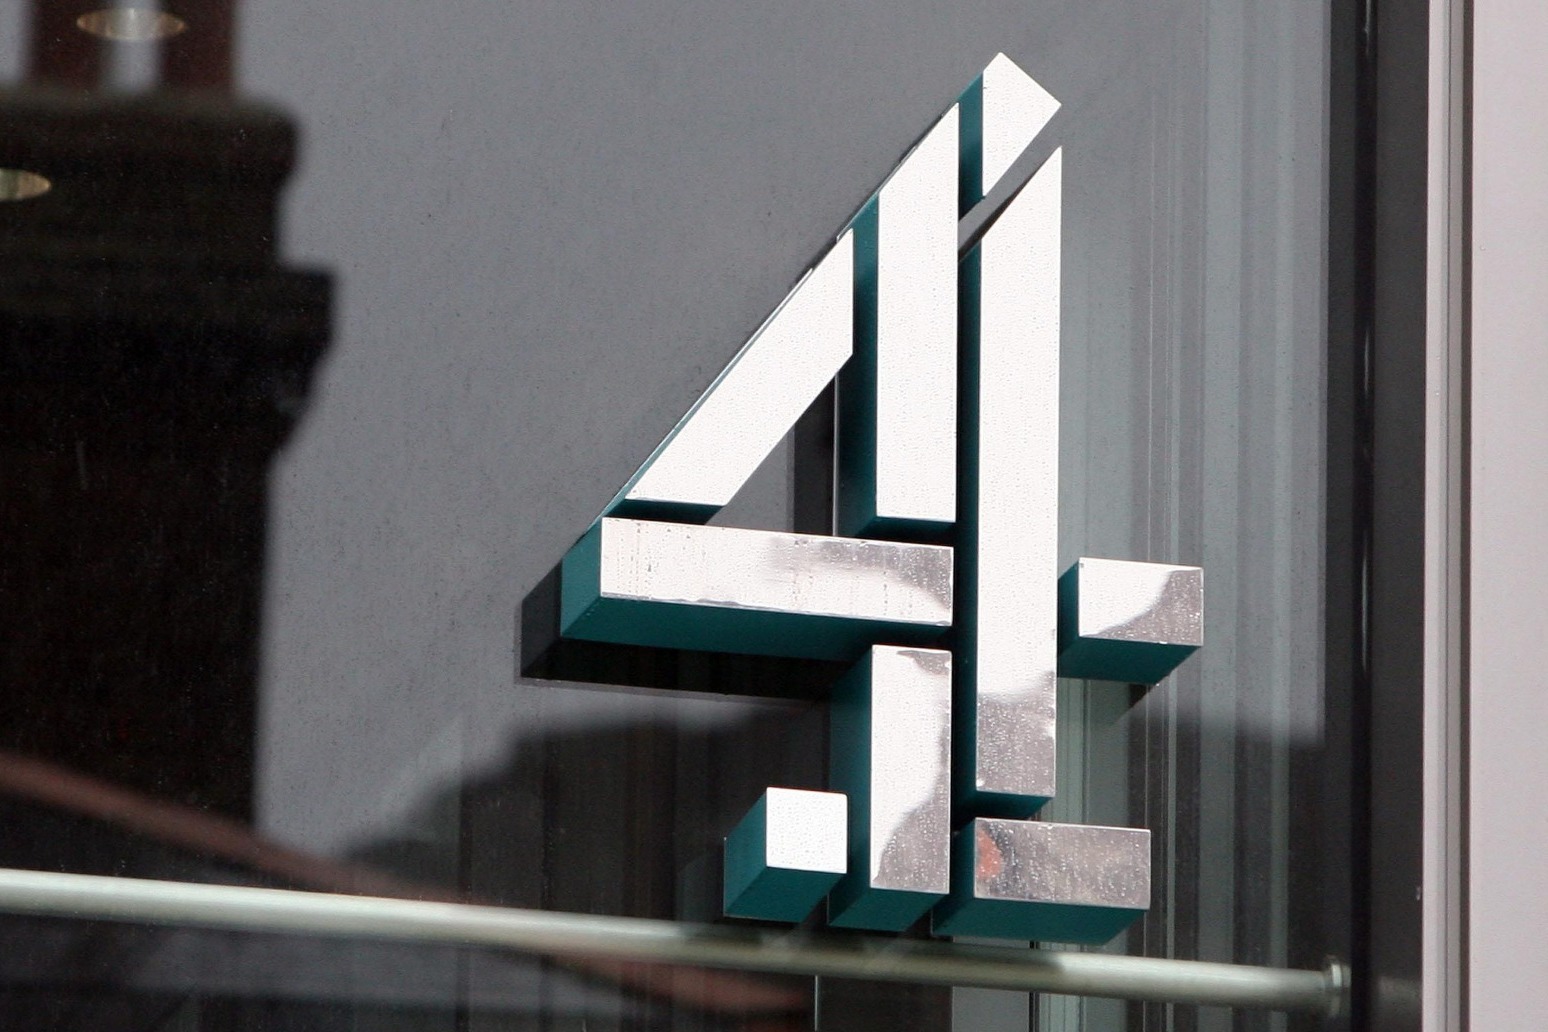 Channel 4 rebrands to ‘futureproof’ on 40th anniversary 